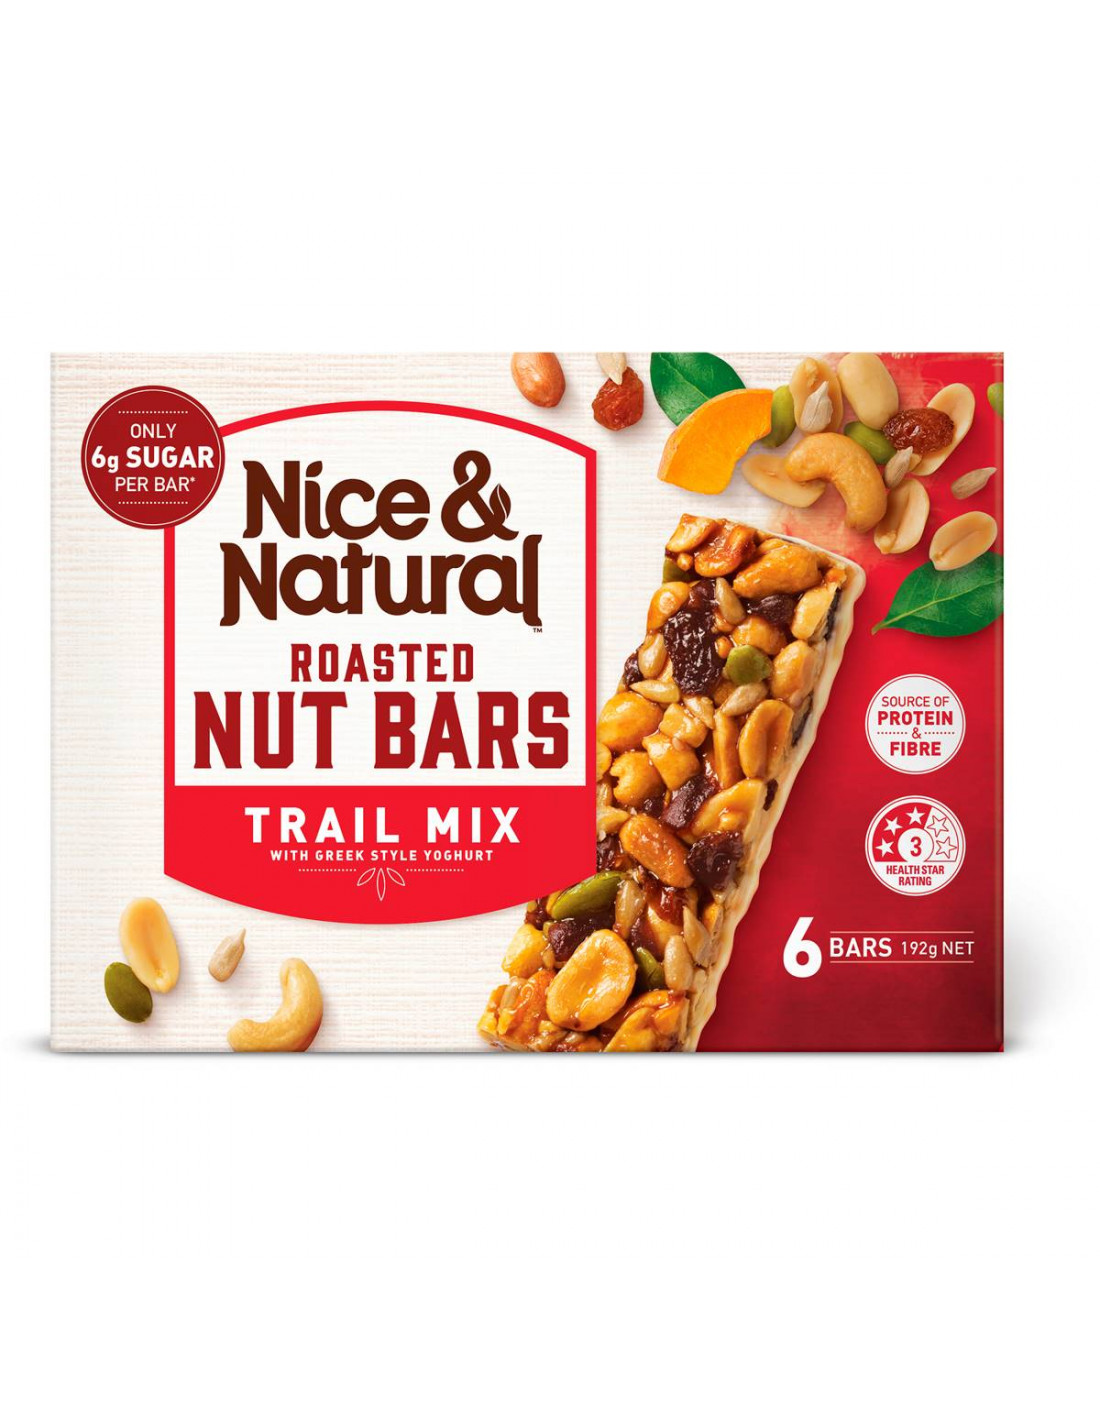 Nice & Natural Nut Bar Trail Mix 192g | Ally's Basket - Direct from...